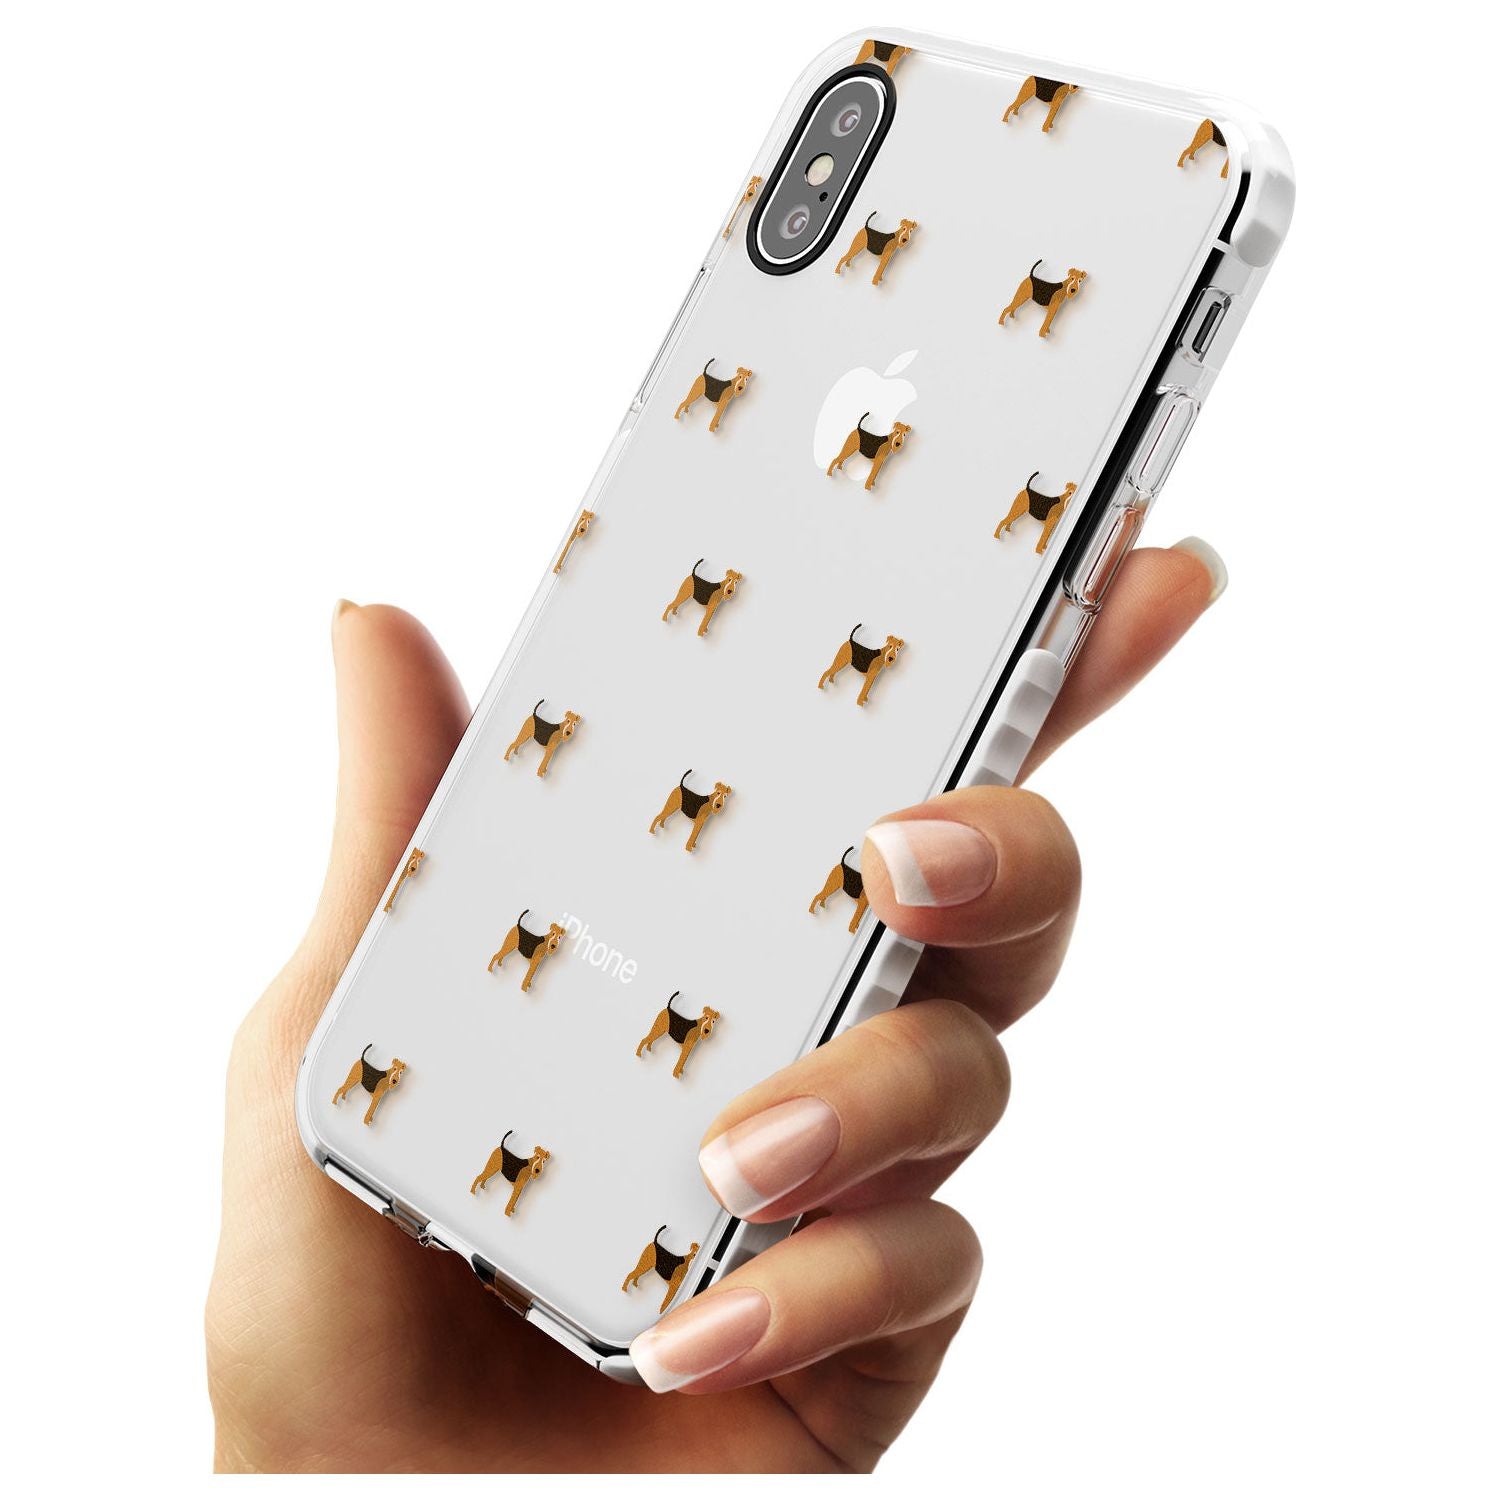 Airedale Terrier Dog Pattern Clear Impact Phone Case for iPhone X XS Max XR